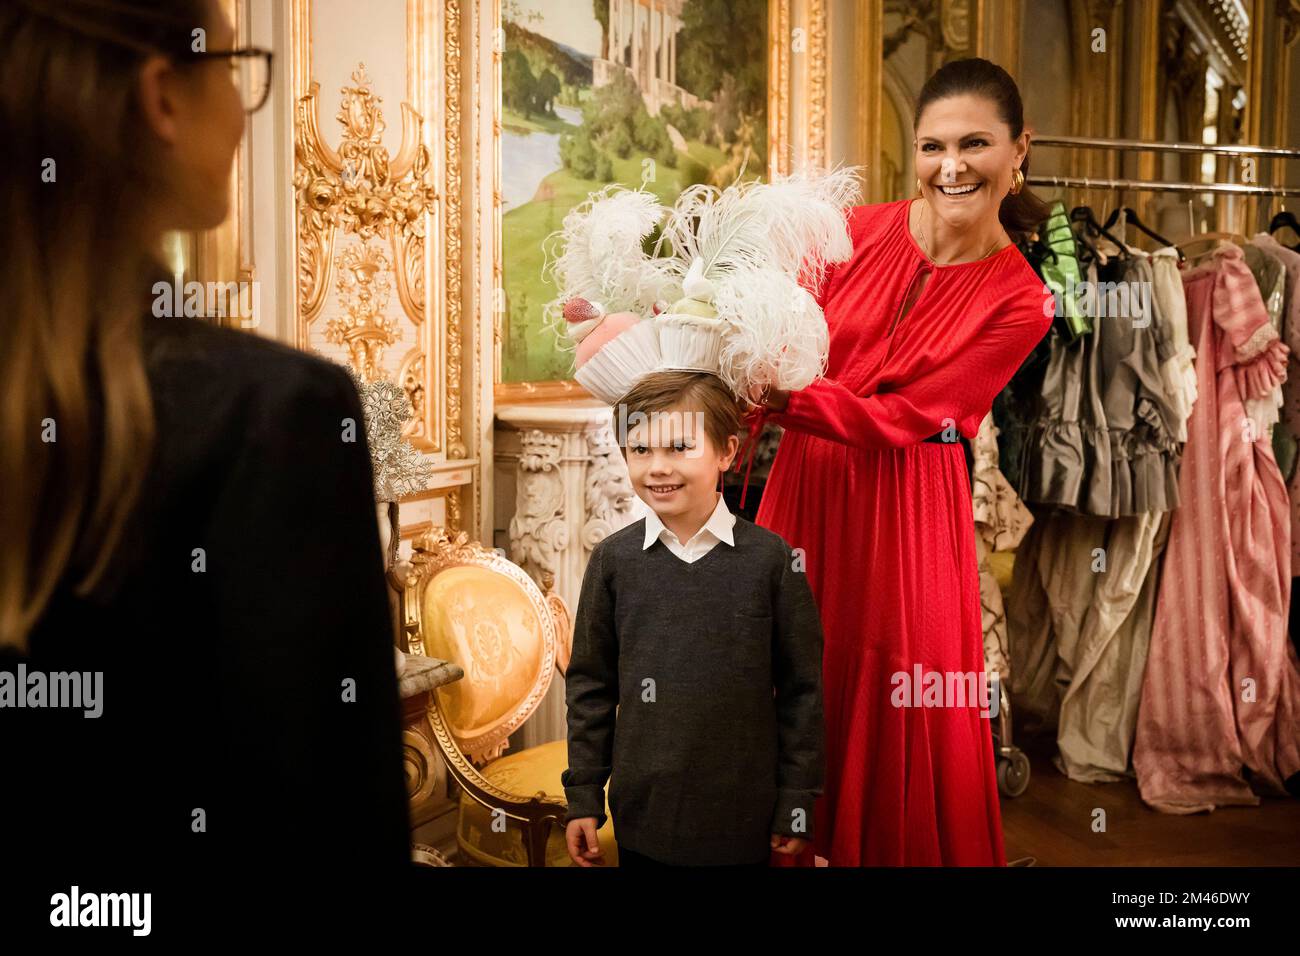 Stockholm,Sweden,19/12/2022, Crown Princess Victoria, Prince Daniel, Princess Estelle and Prince Oscar at the Royal Opera House in Stockholm for the performance of Cinderella. Before the curtain went up, the Crown Princess Family went backstage to meet some of the Opera's employees.Photo: Sören Vilks/Kungliga Operan/ Handout / code 10501  **MANDATORY BYLINE: Sören Vilks/Kungliga Operan** **For editorial use only. The image comes from an external source and is distributed in its original form as a service to our subscribers** Stock Photo